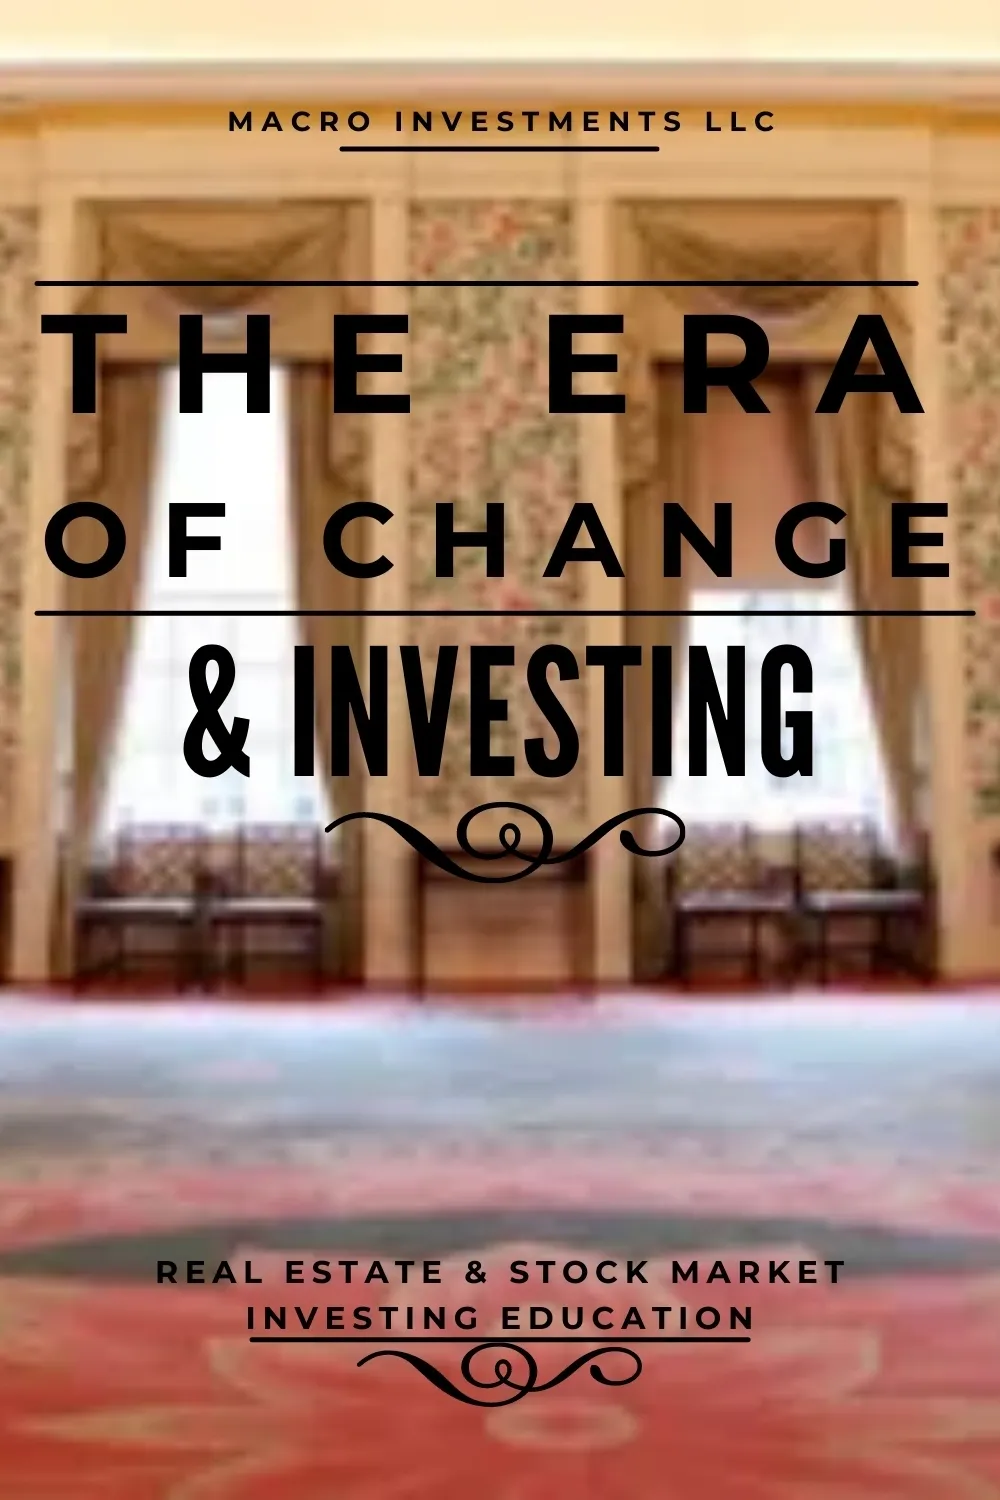 In This Era of Change, Where are You Investing? | Blog | InvestingTE.com